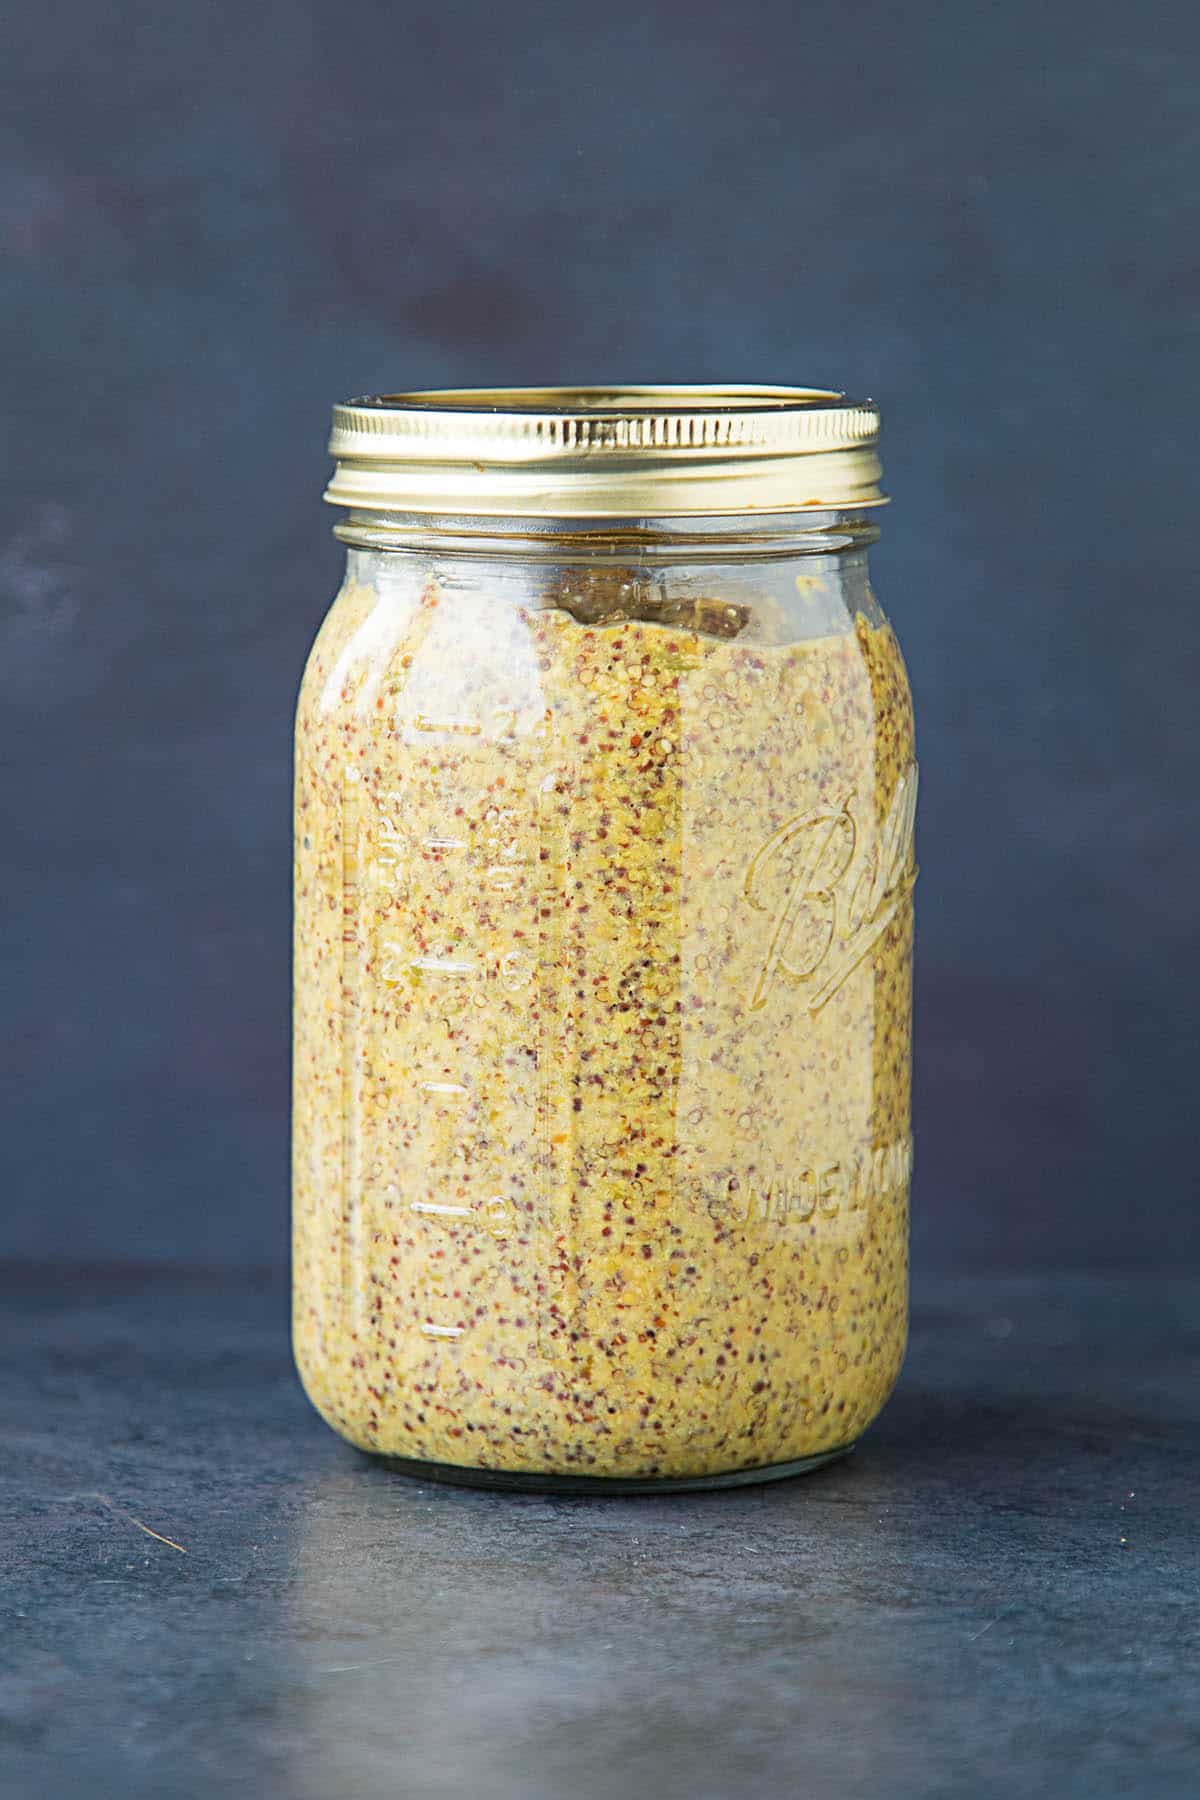 Roasted Hatch Chile-Beer Mustard in a jar